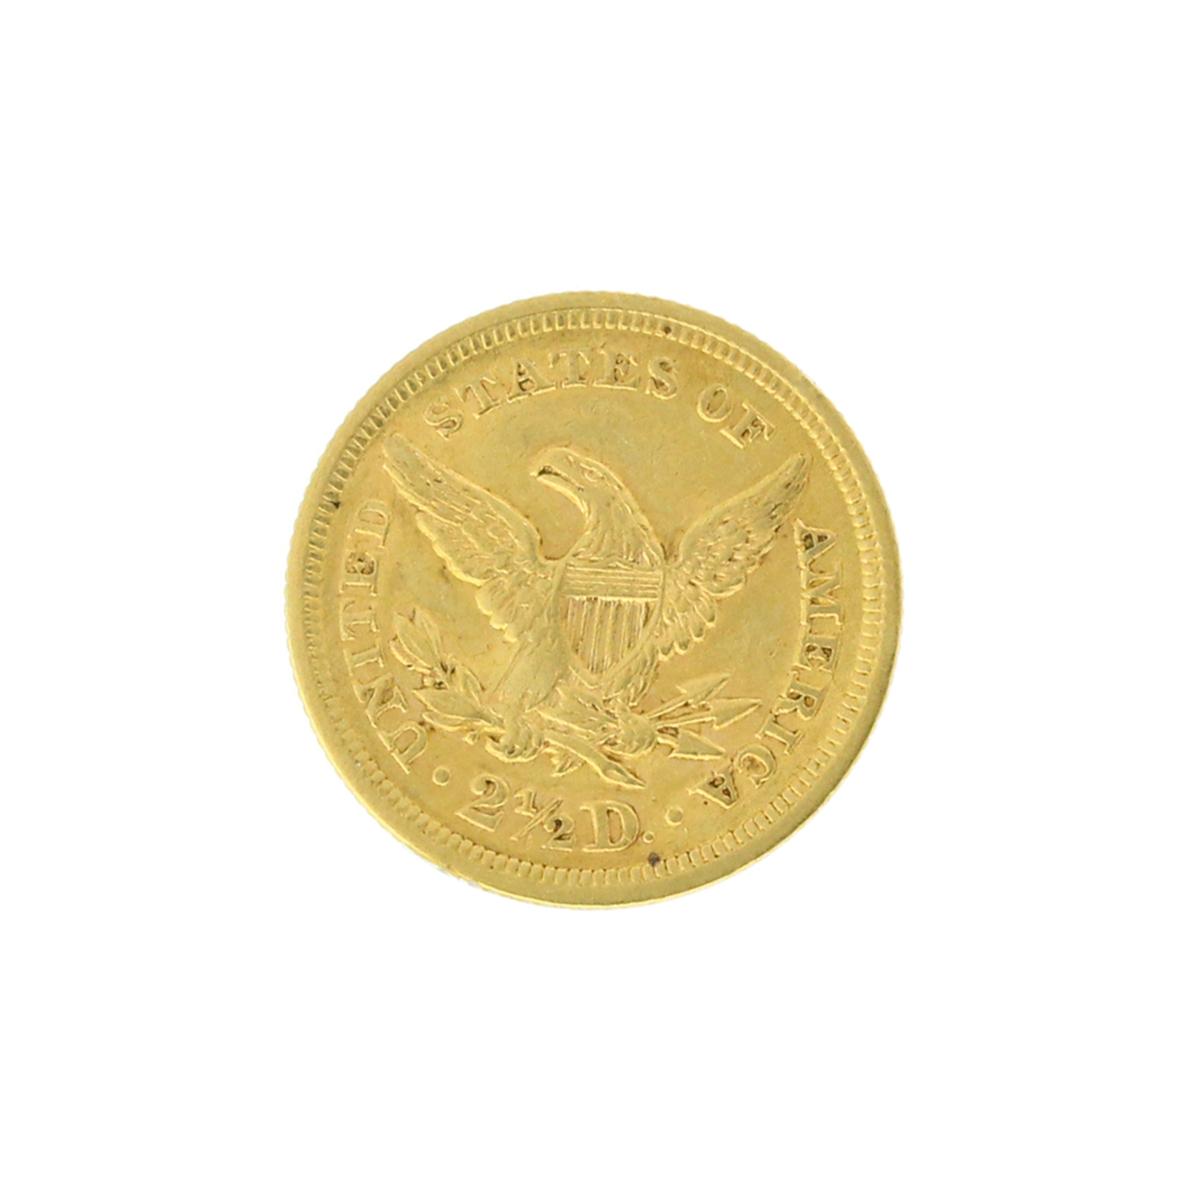 Rare 1853 $2.50 Liberty Head Gold Coin Great Investment